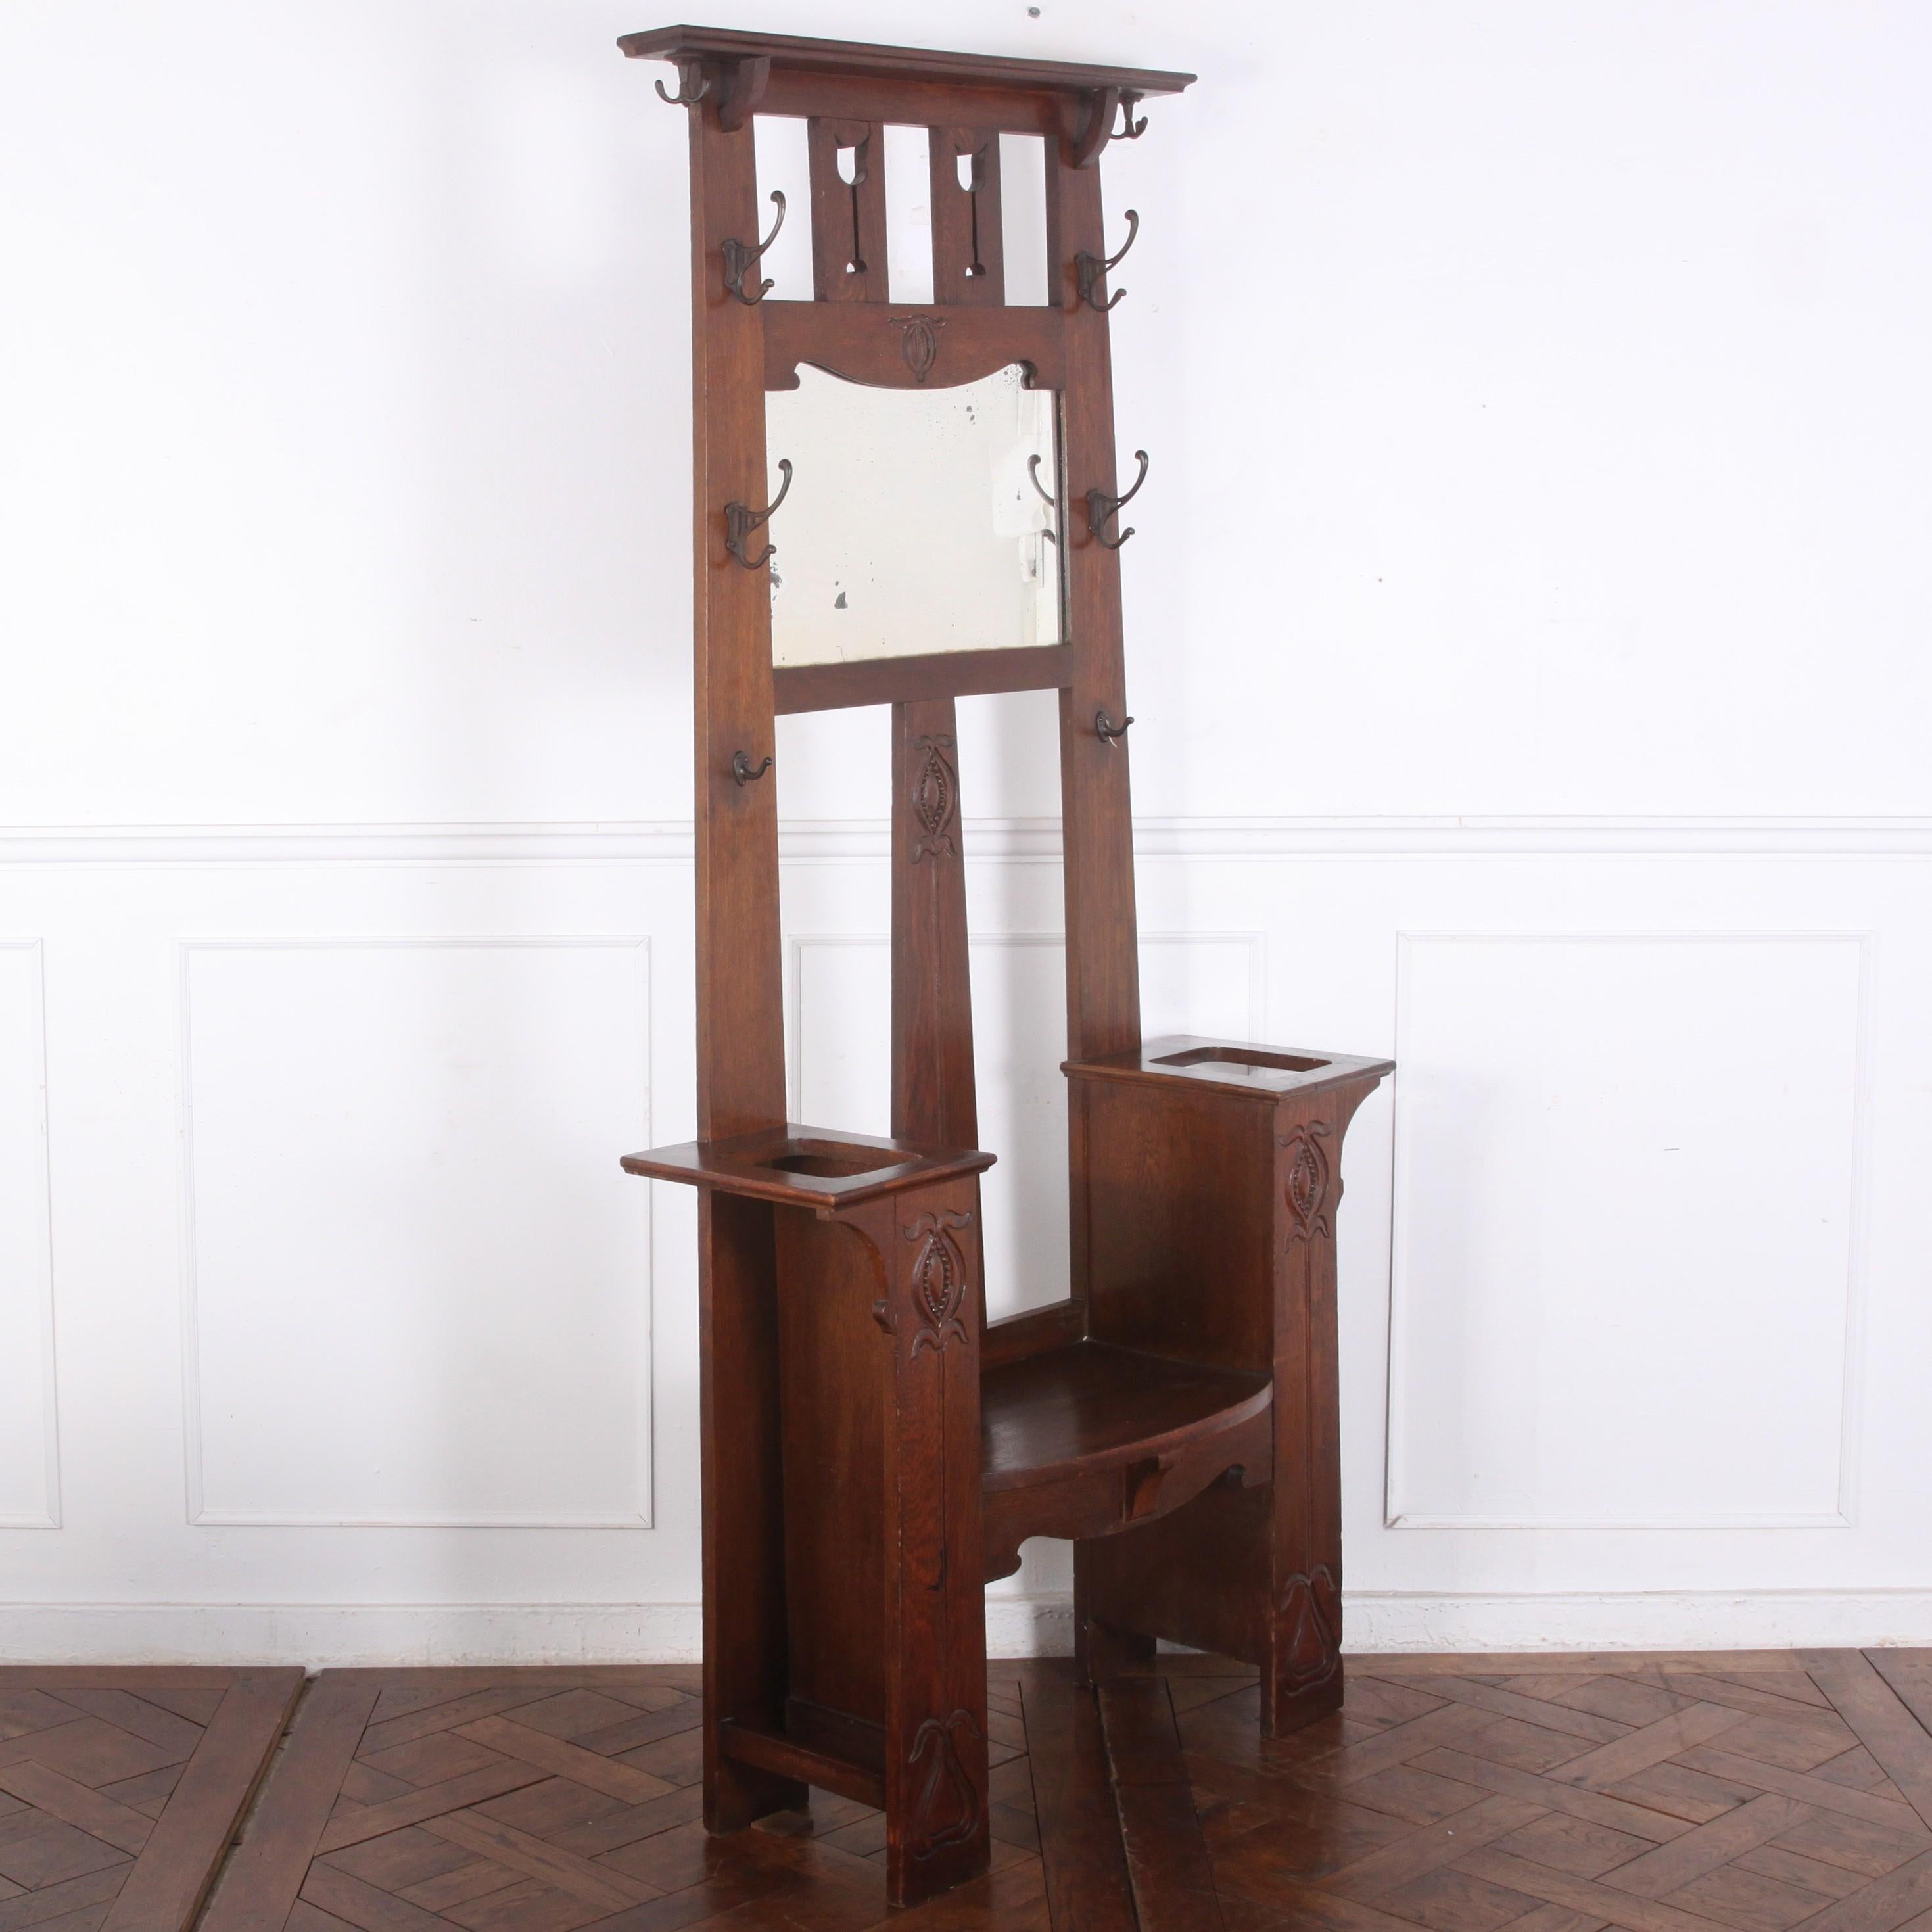 A British- possibly Scottish- carved oak Arts & Crafts period seated hall stand with simple geometric lines typical of the style and abstracted ‘pomegranate’ carved details. Upper mirror with a variety of hooks and side slots for walking sticks and